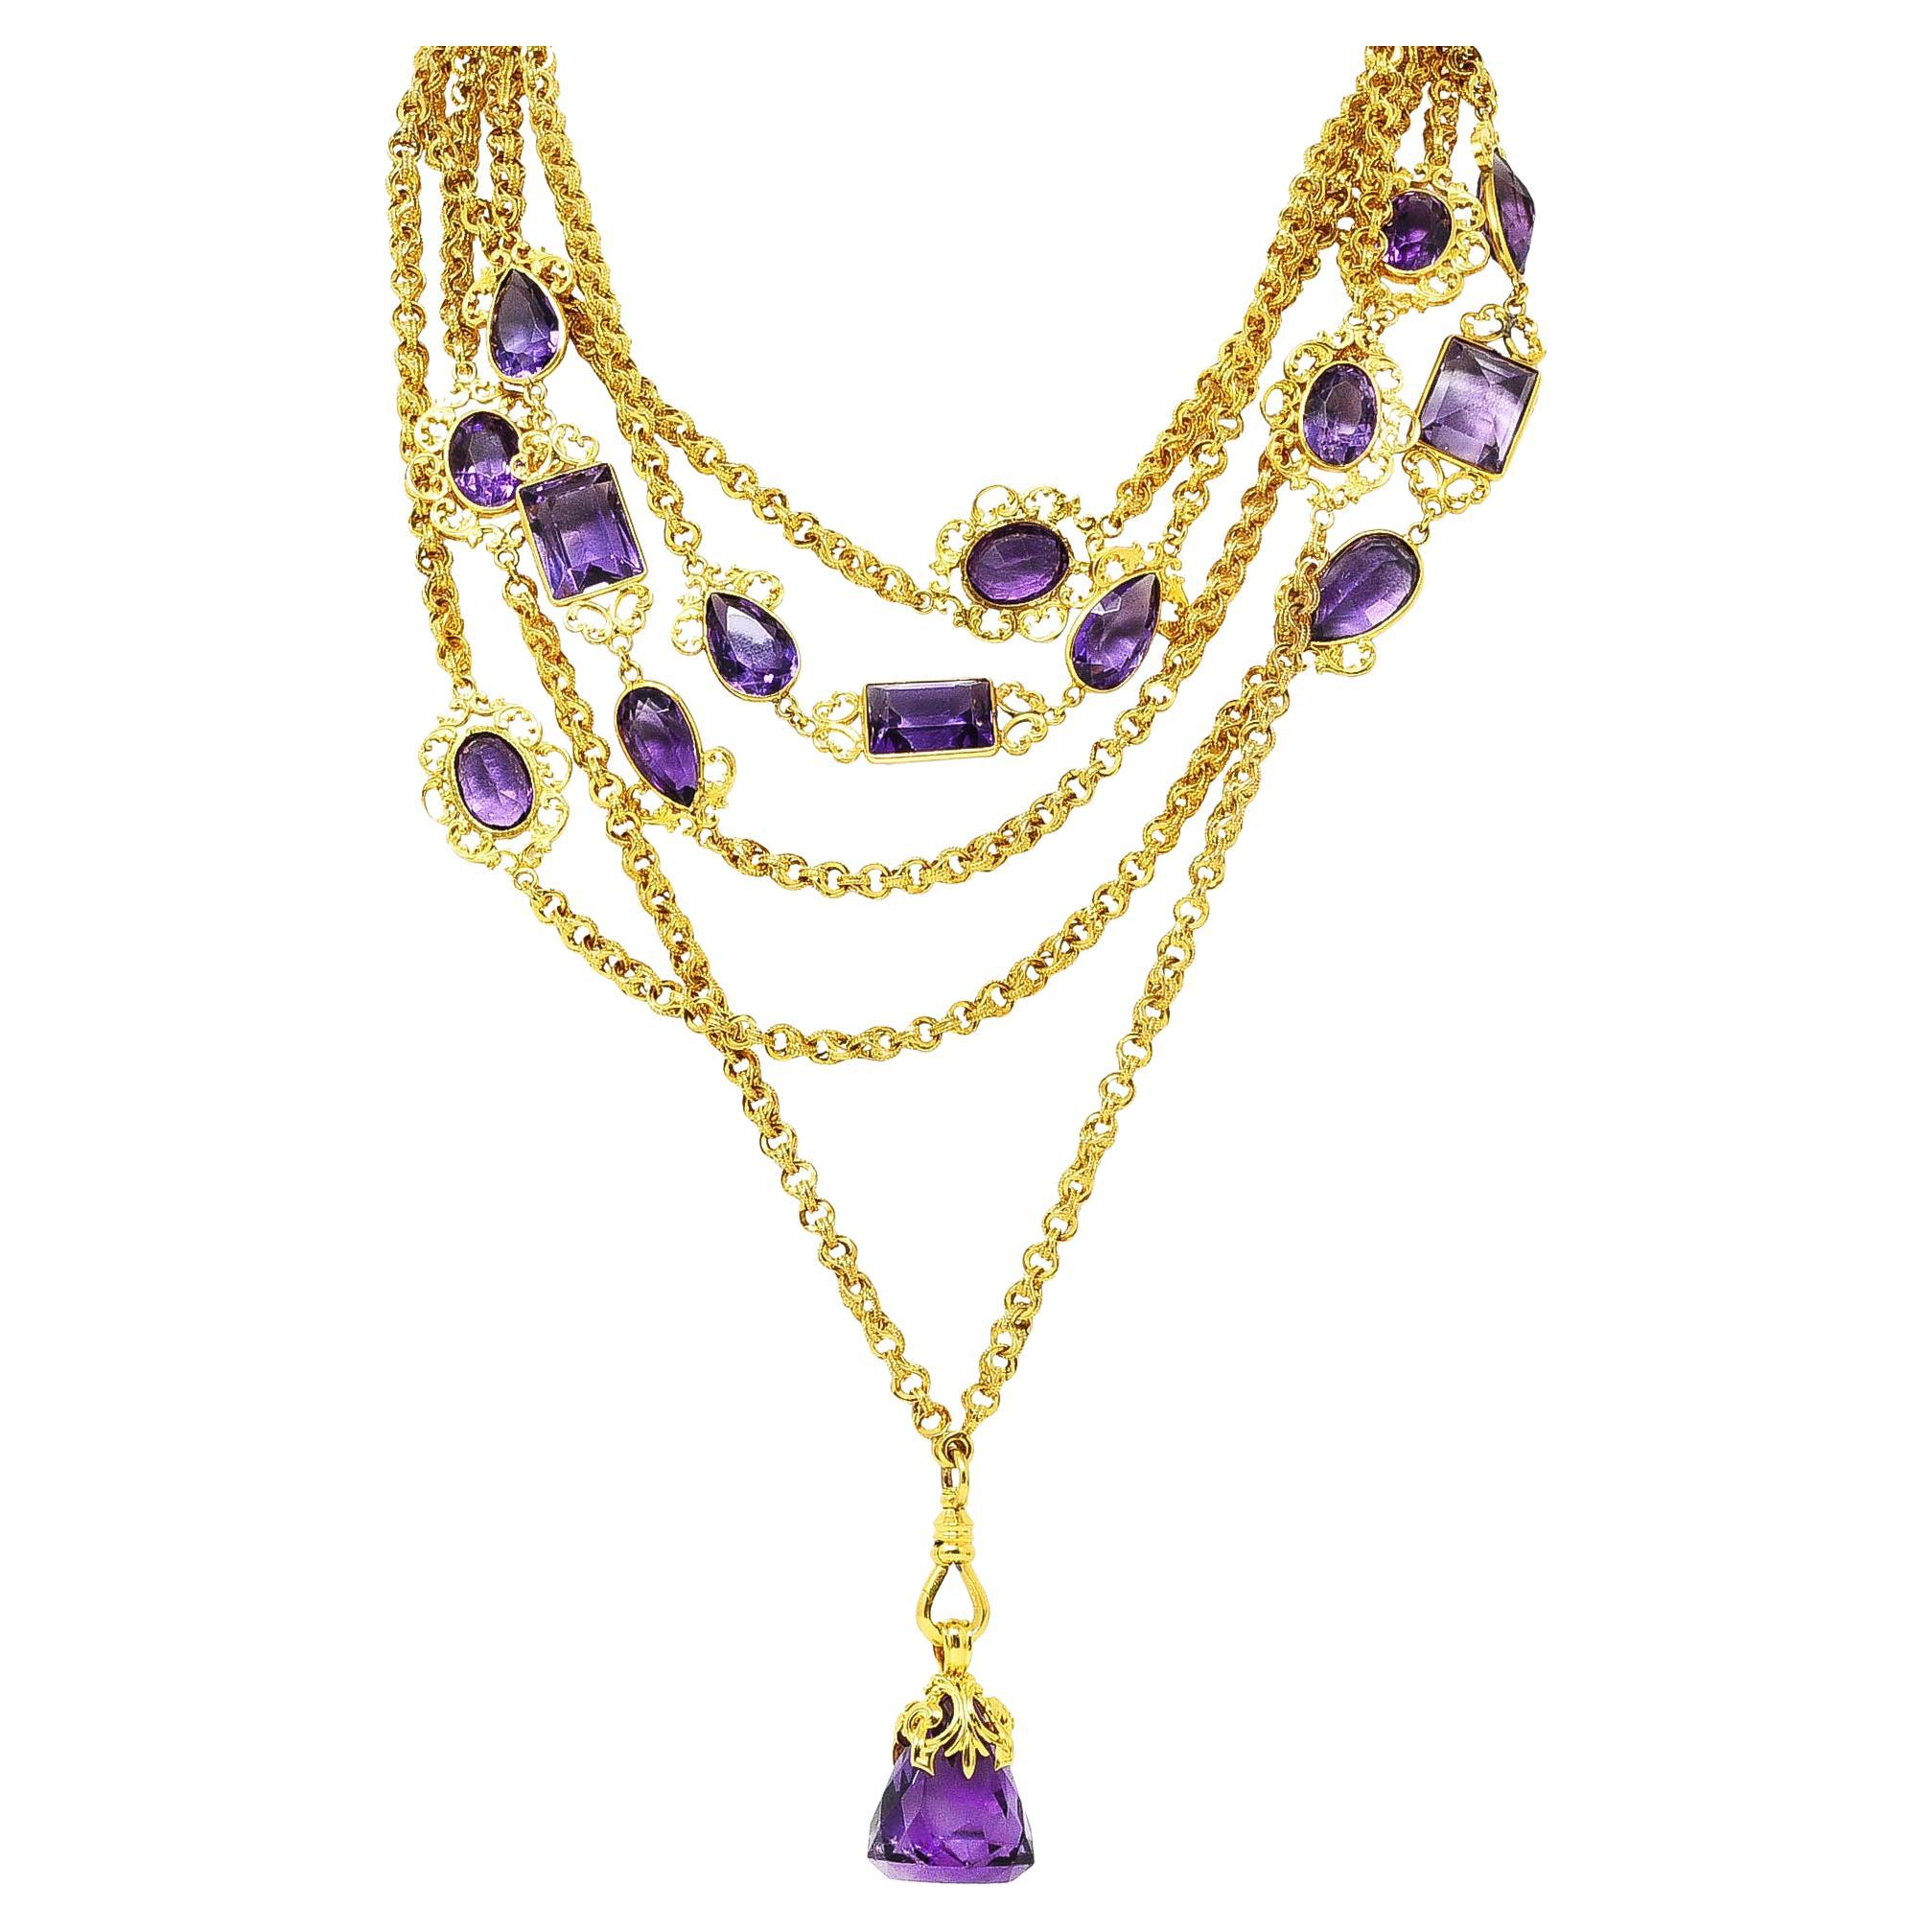 Comprised of stylized grooved cable links with milgrain edges featuring stations of bezel set amethyst. Oval, pear, and rectangular cuts ranging in size - transparent deeply saturated medium purple in color. Accented by scrolling foliate frame